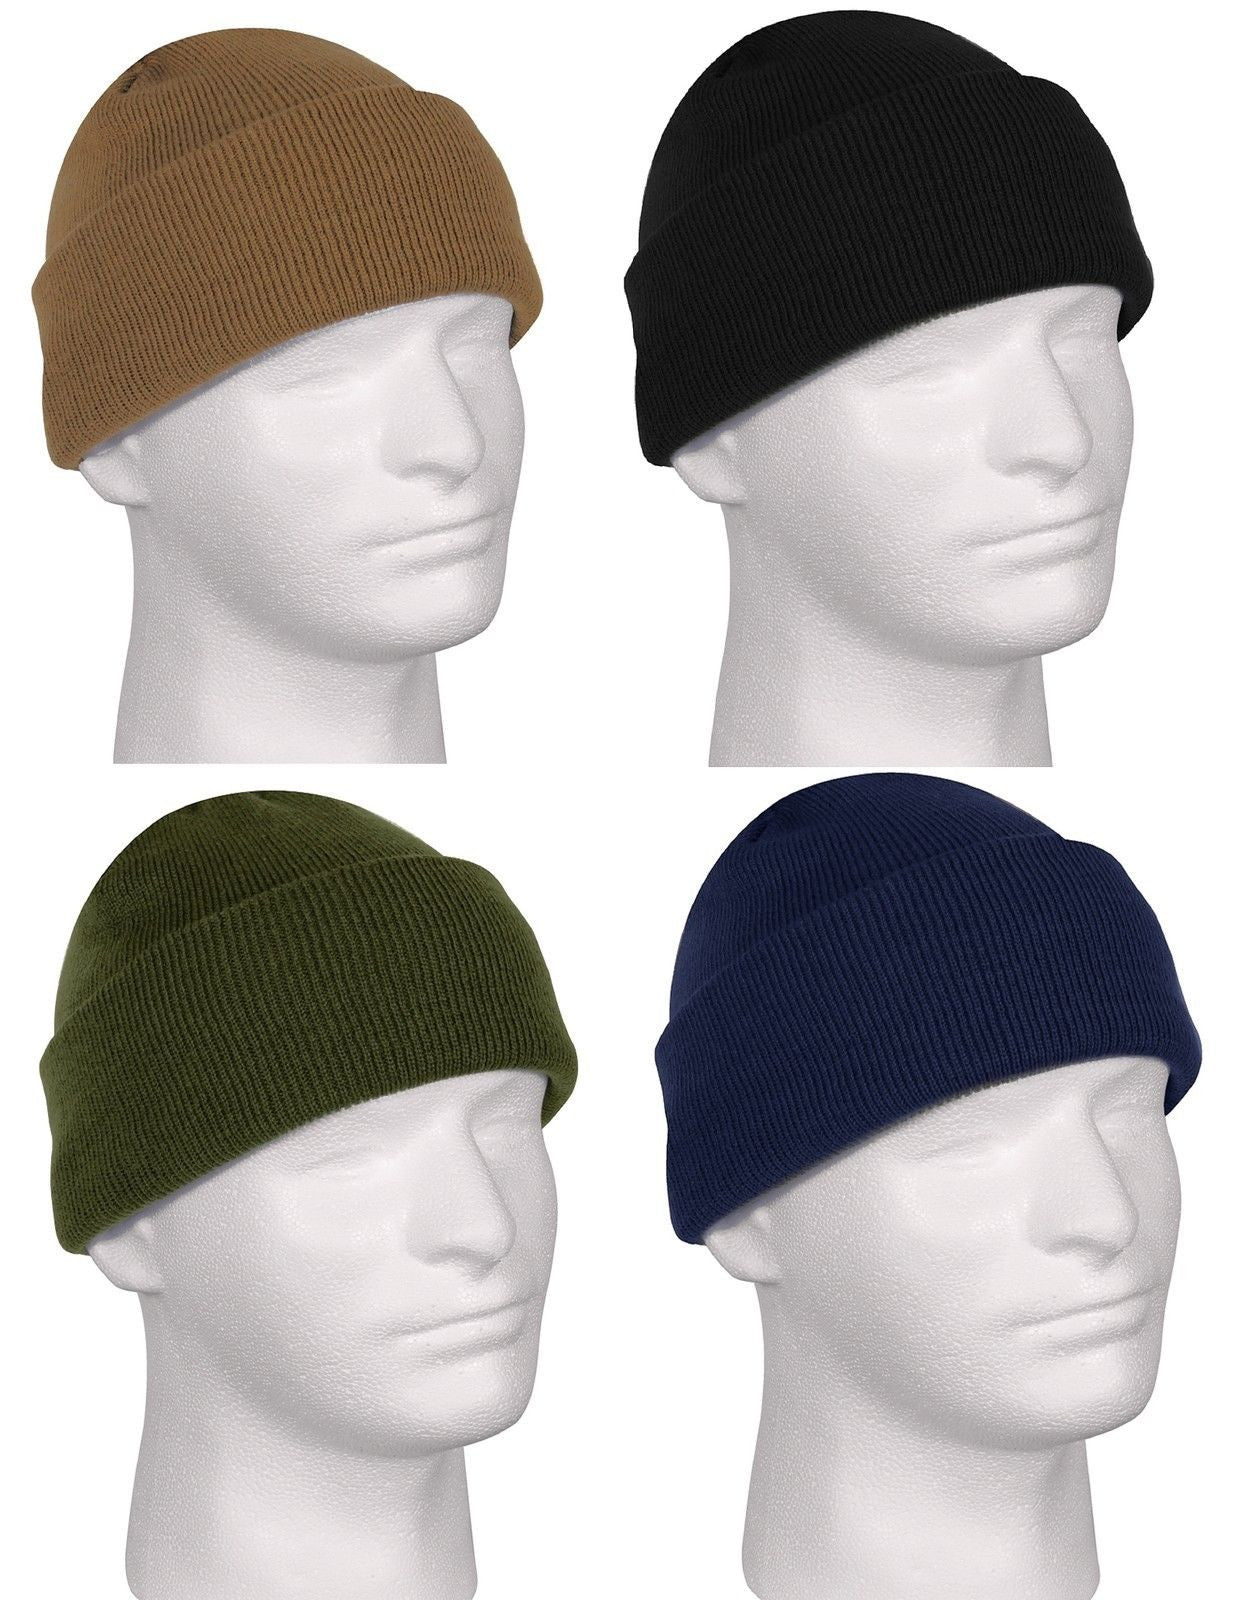 Deluxe Fine-Knit Winter Watch Cap - 100% Acrylic Solid Colors Snow & Ski Hat